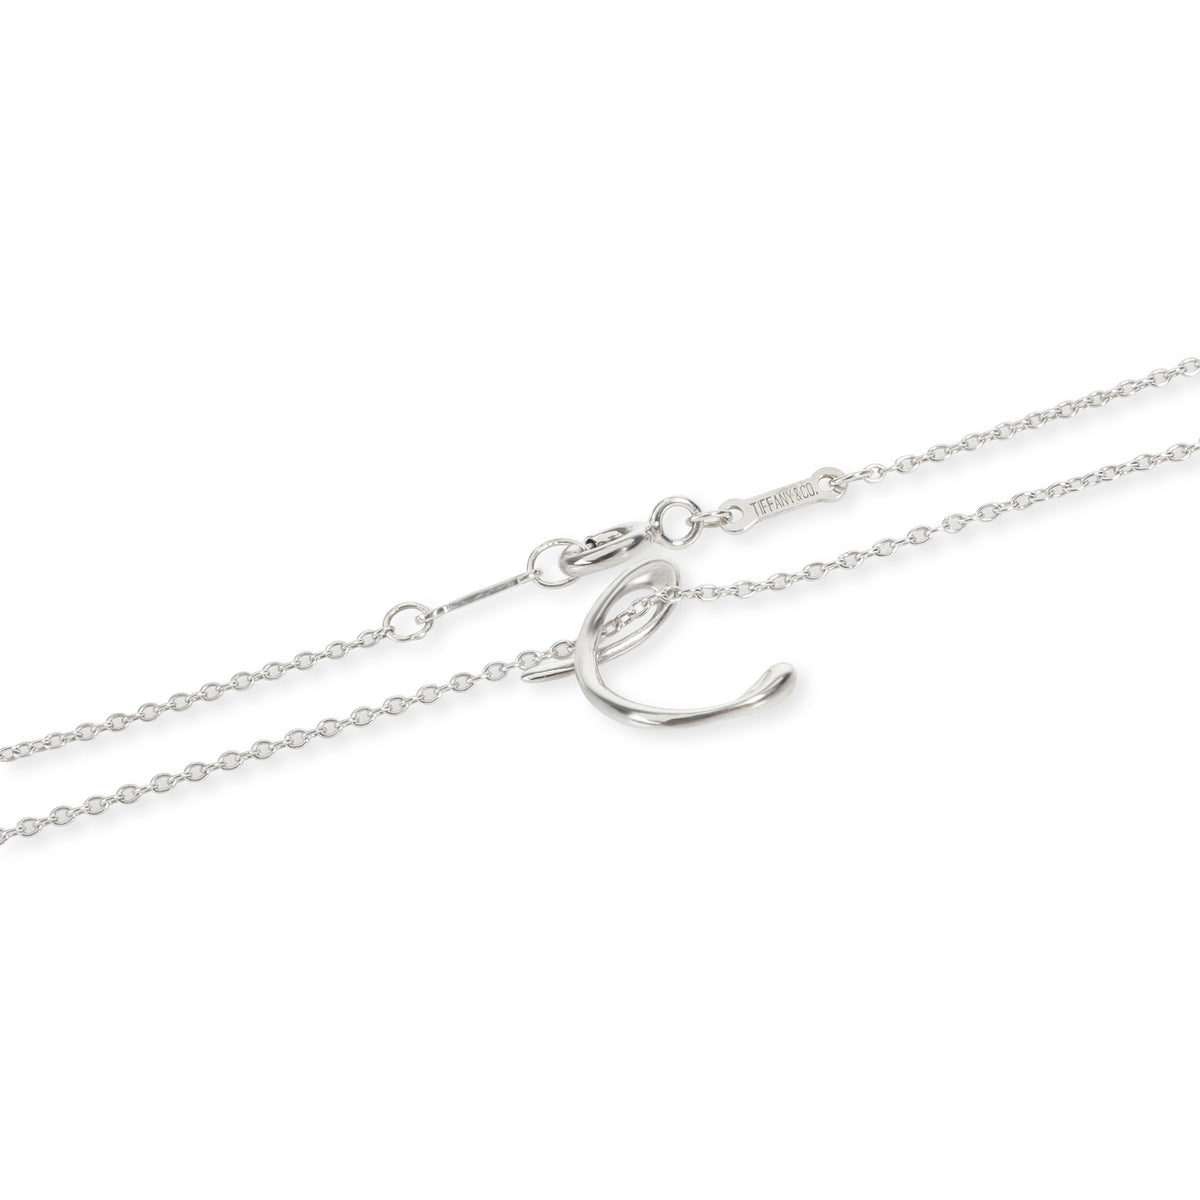 Tiffany & Co. Elsa Peretti Initial C Necklace in Sterling Silver